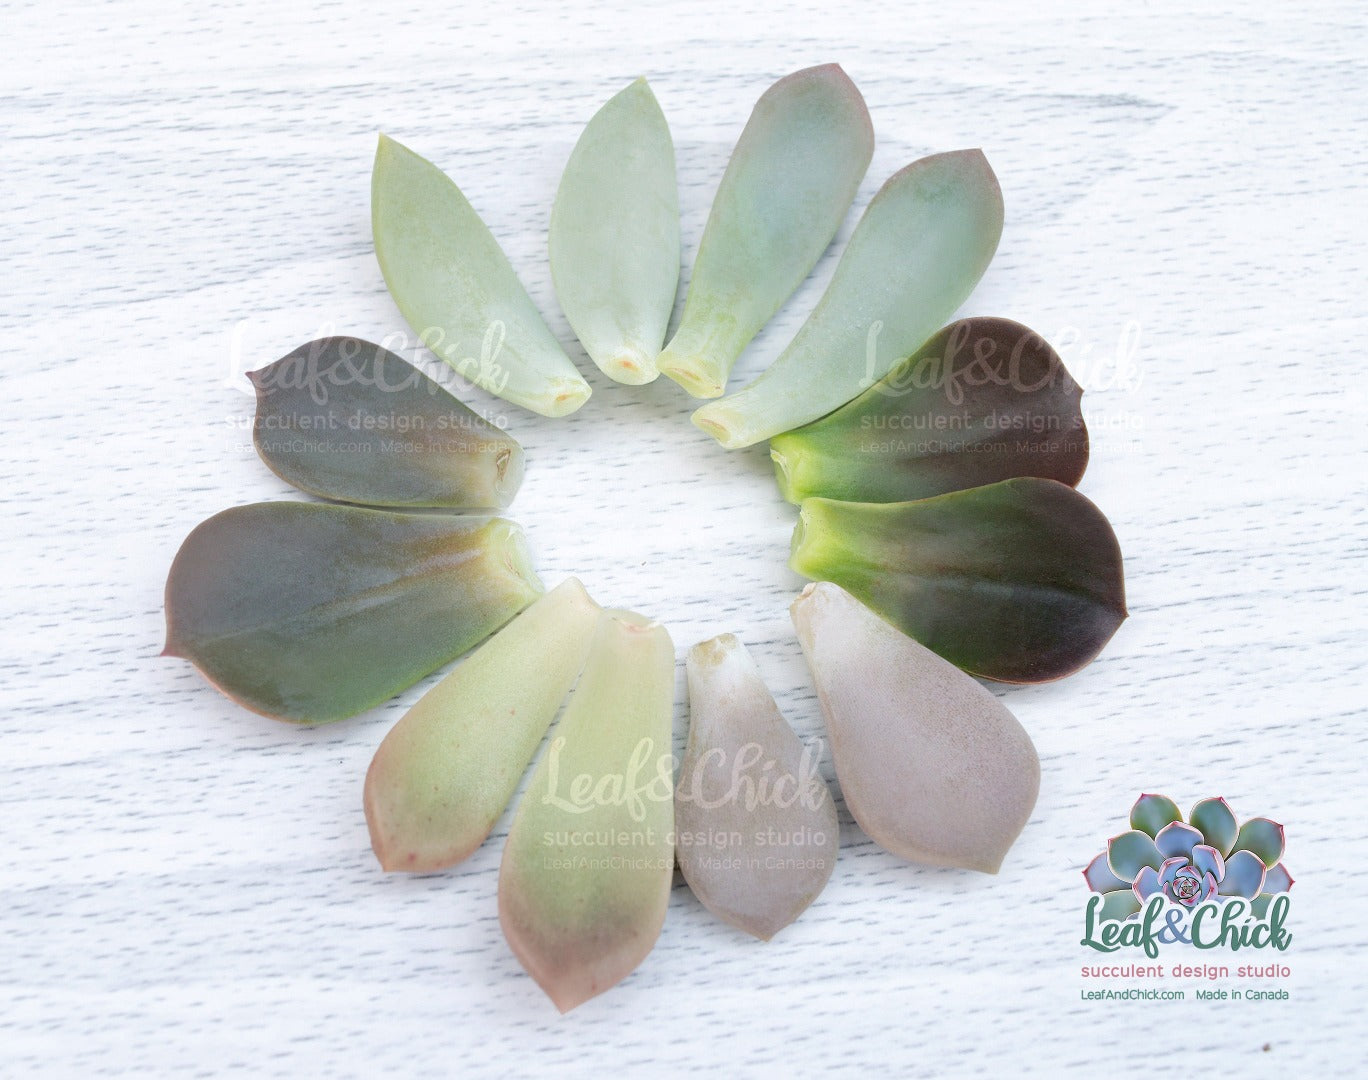 premium succulent leaves by Leaf & Chick